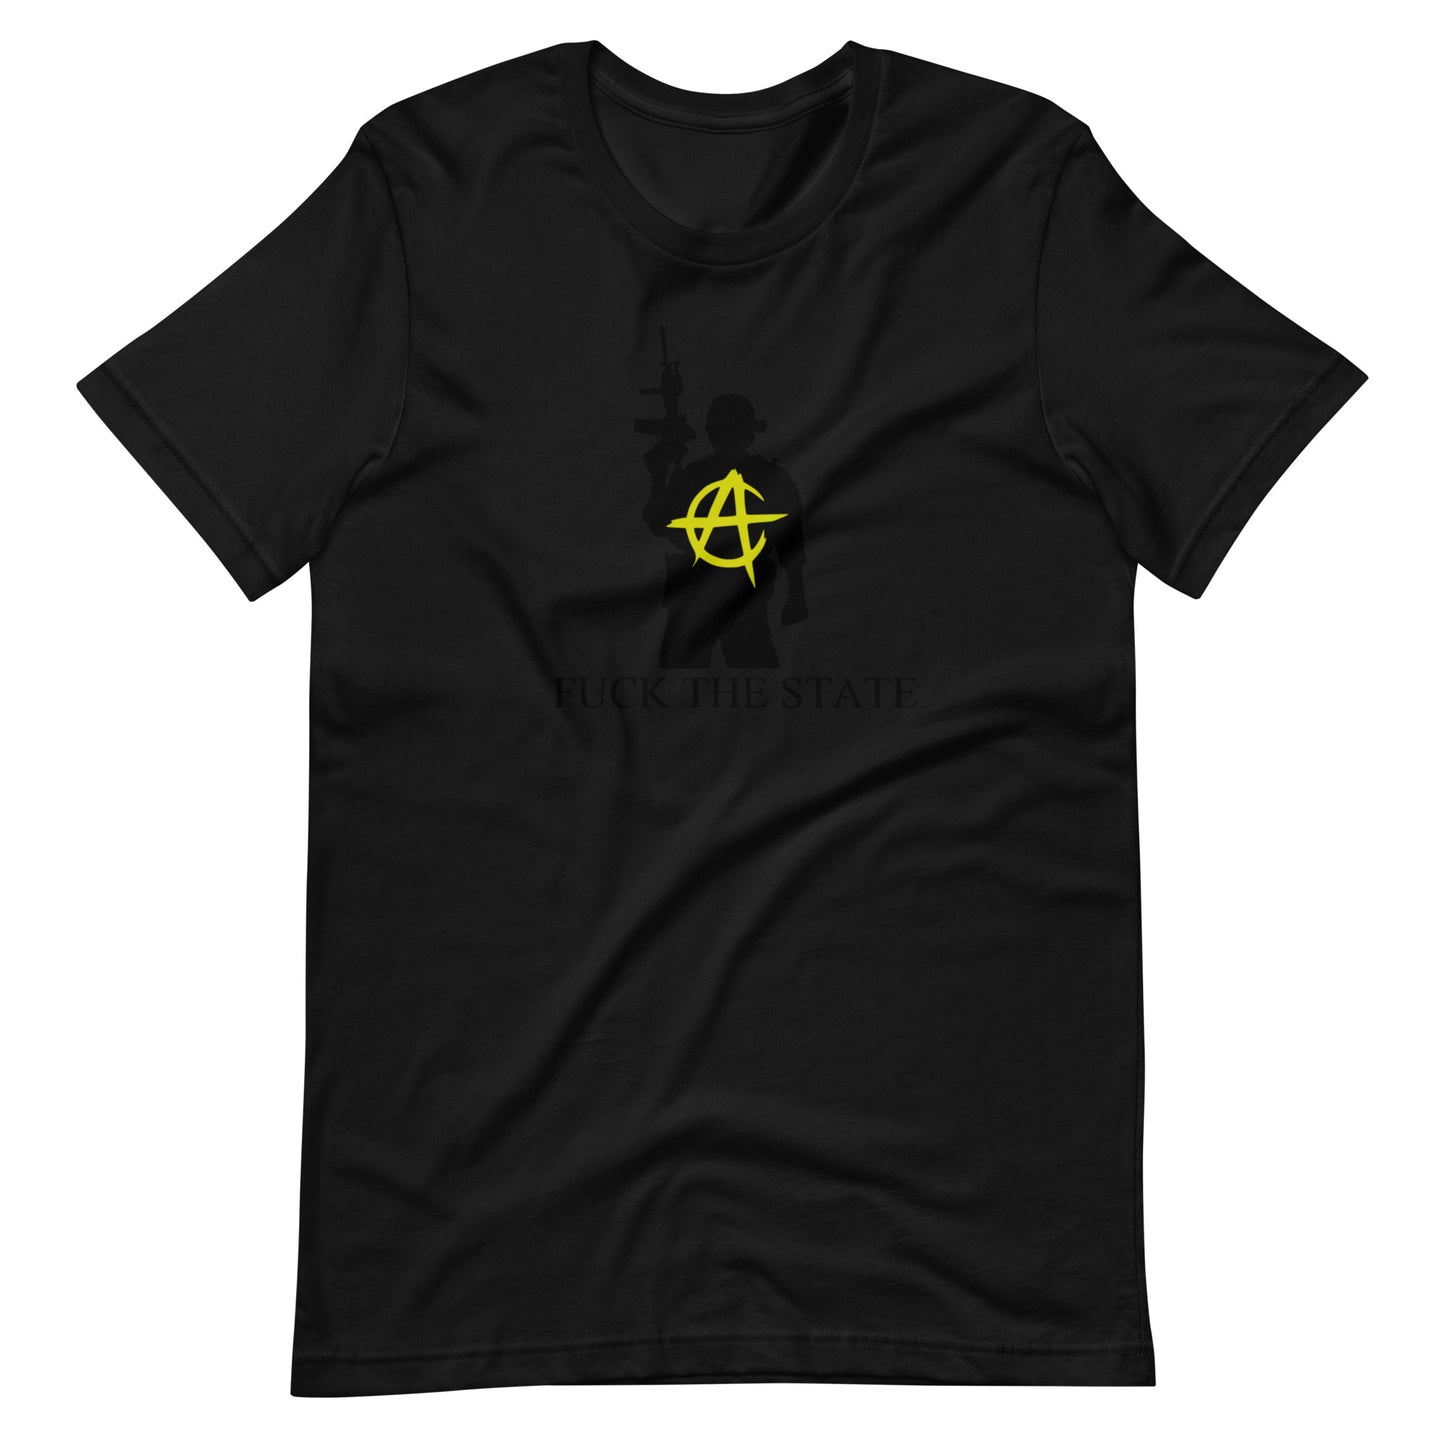 "Fuck The State" Gold By @AncapAir Unisex t-shirt